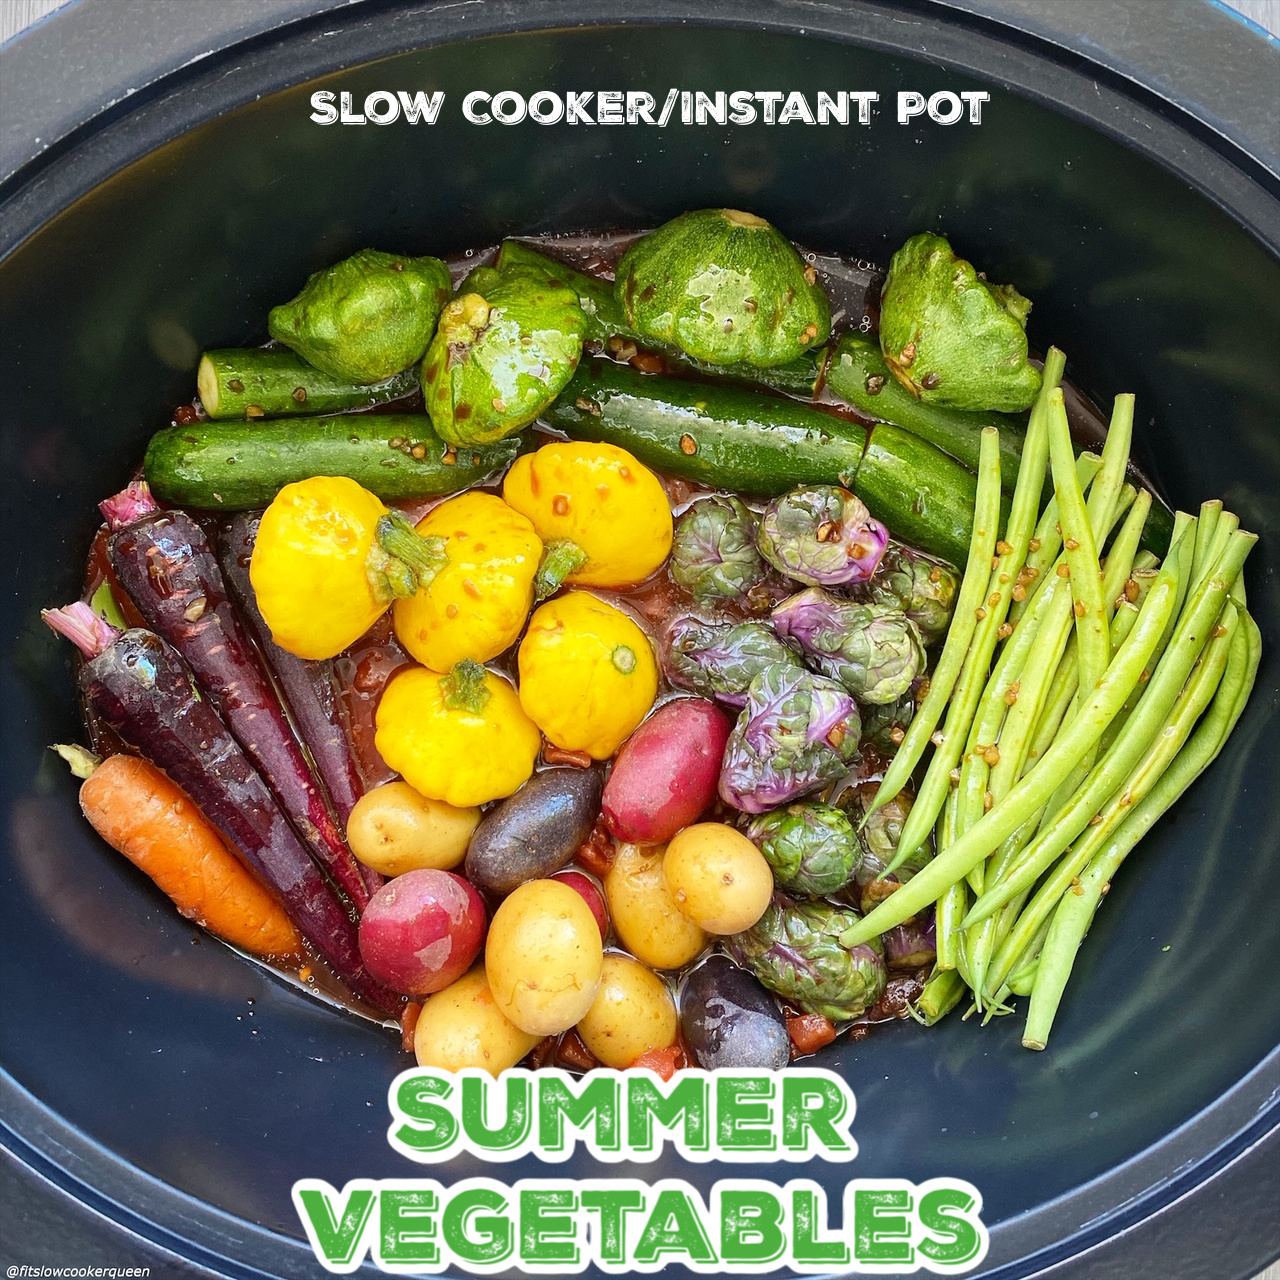 How To Use Your Instant Pot To Slow Cook - Fit Slow Cooker Queen